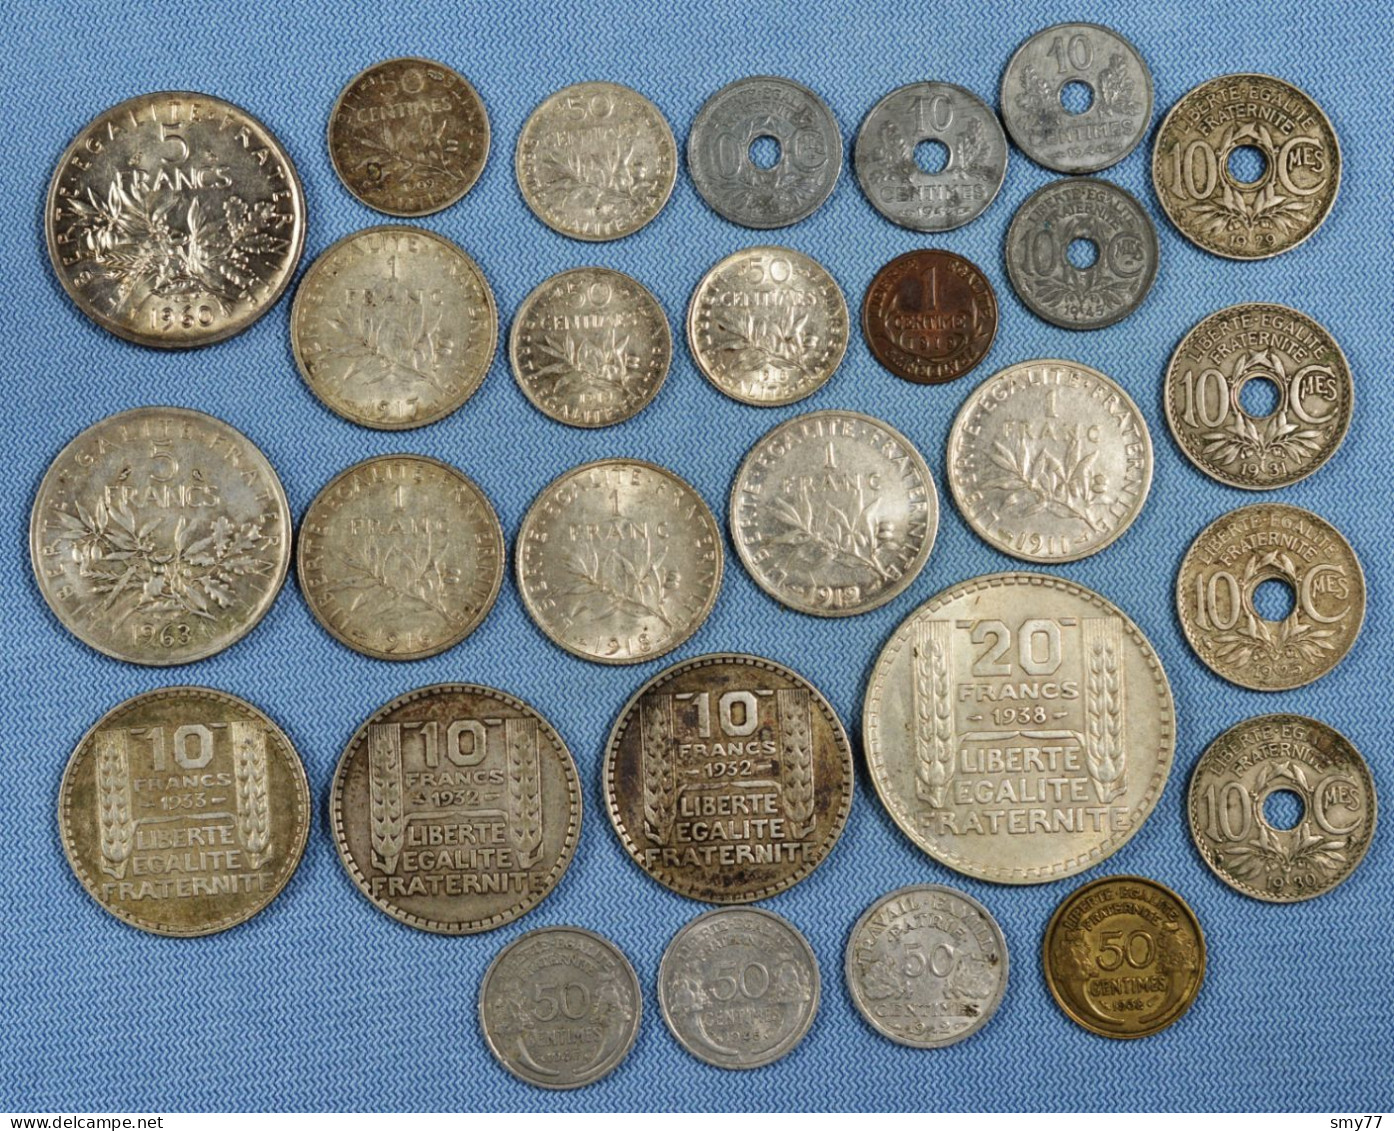 France • 28x • including many silver, some scarcer and error coins • See details • all in high or very grade • [24-624]